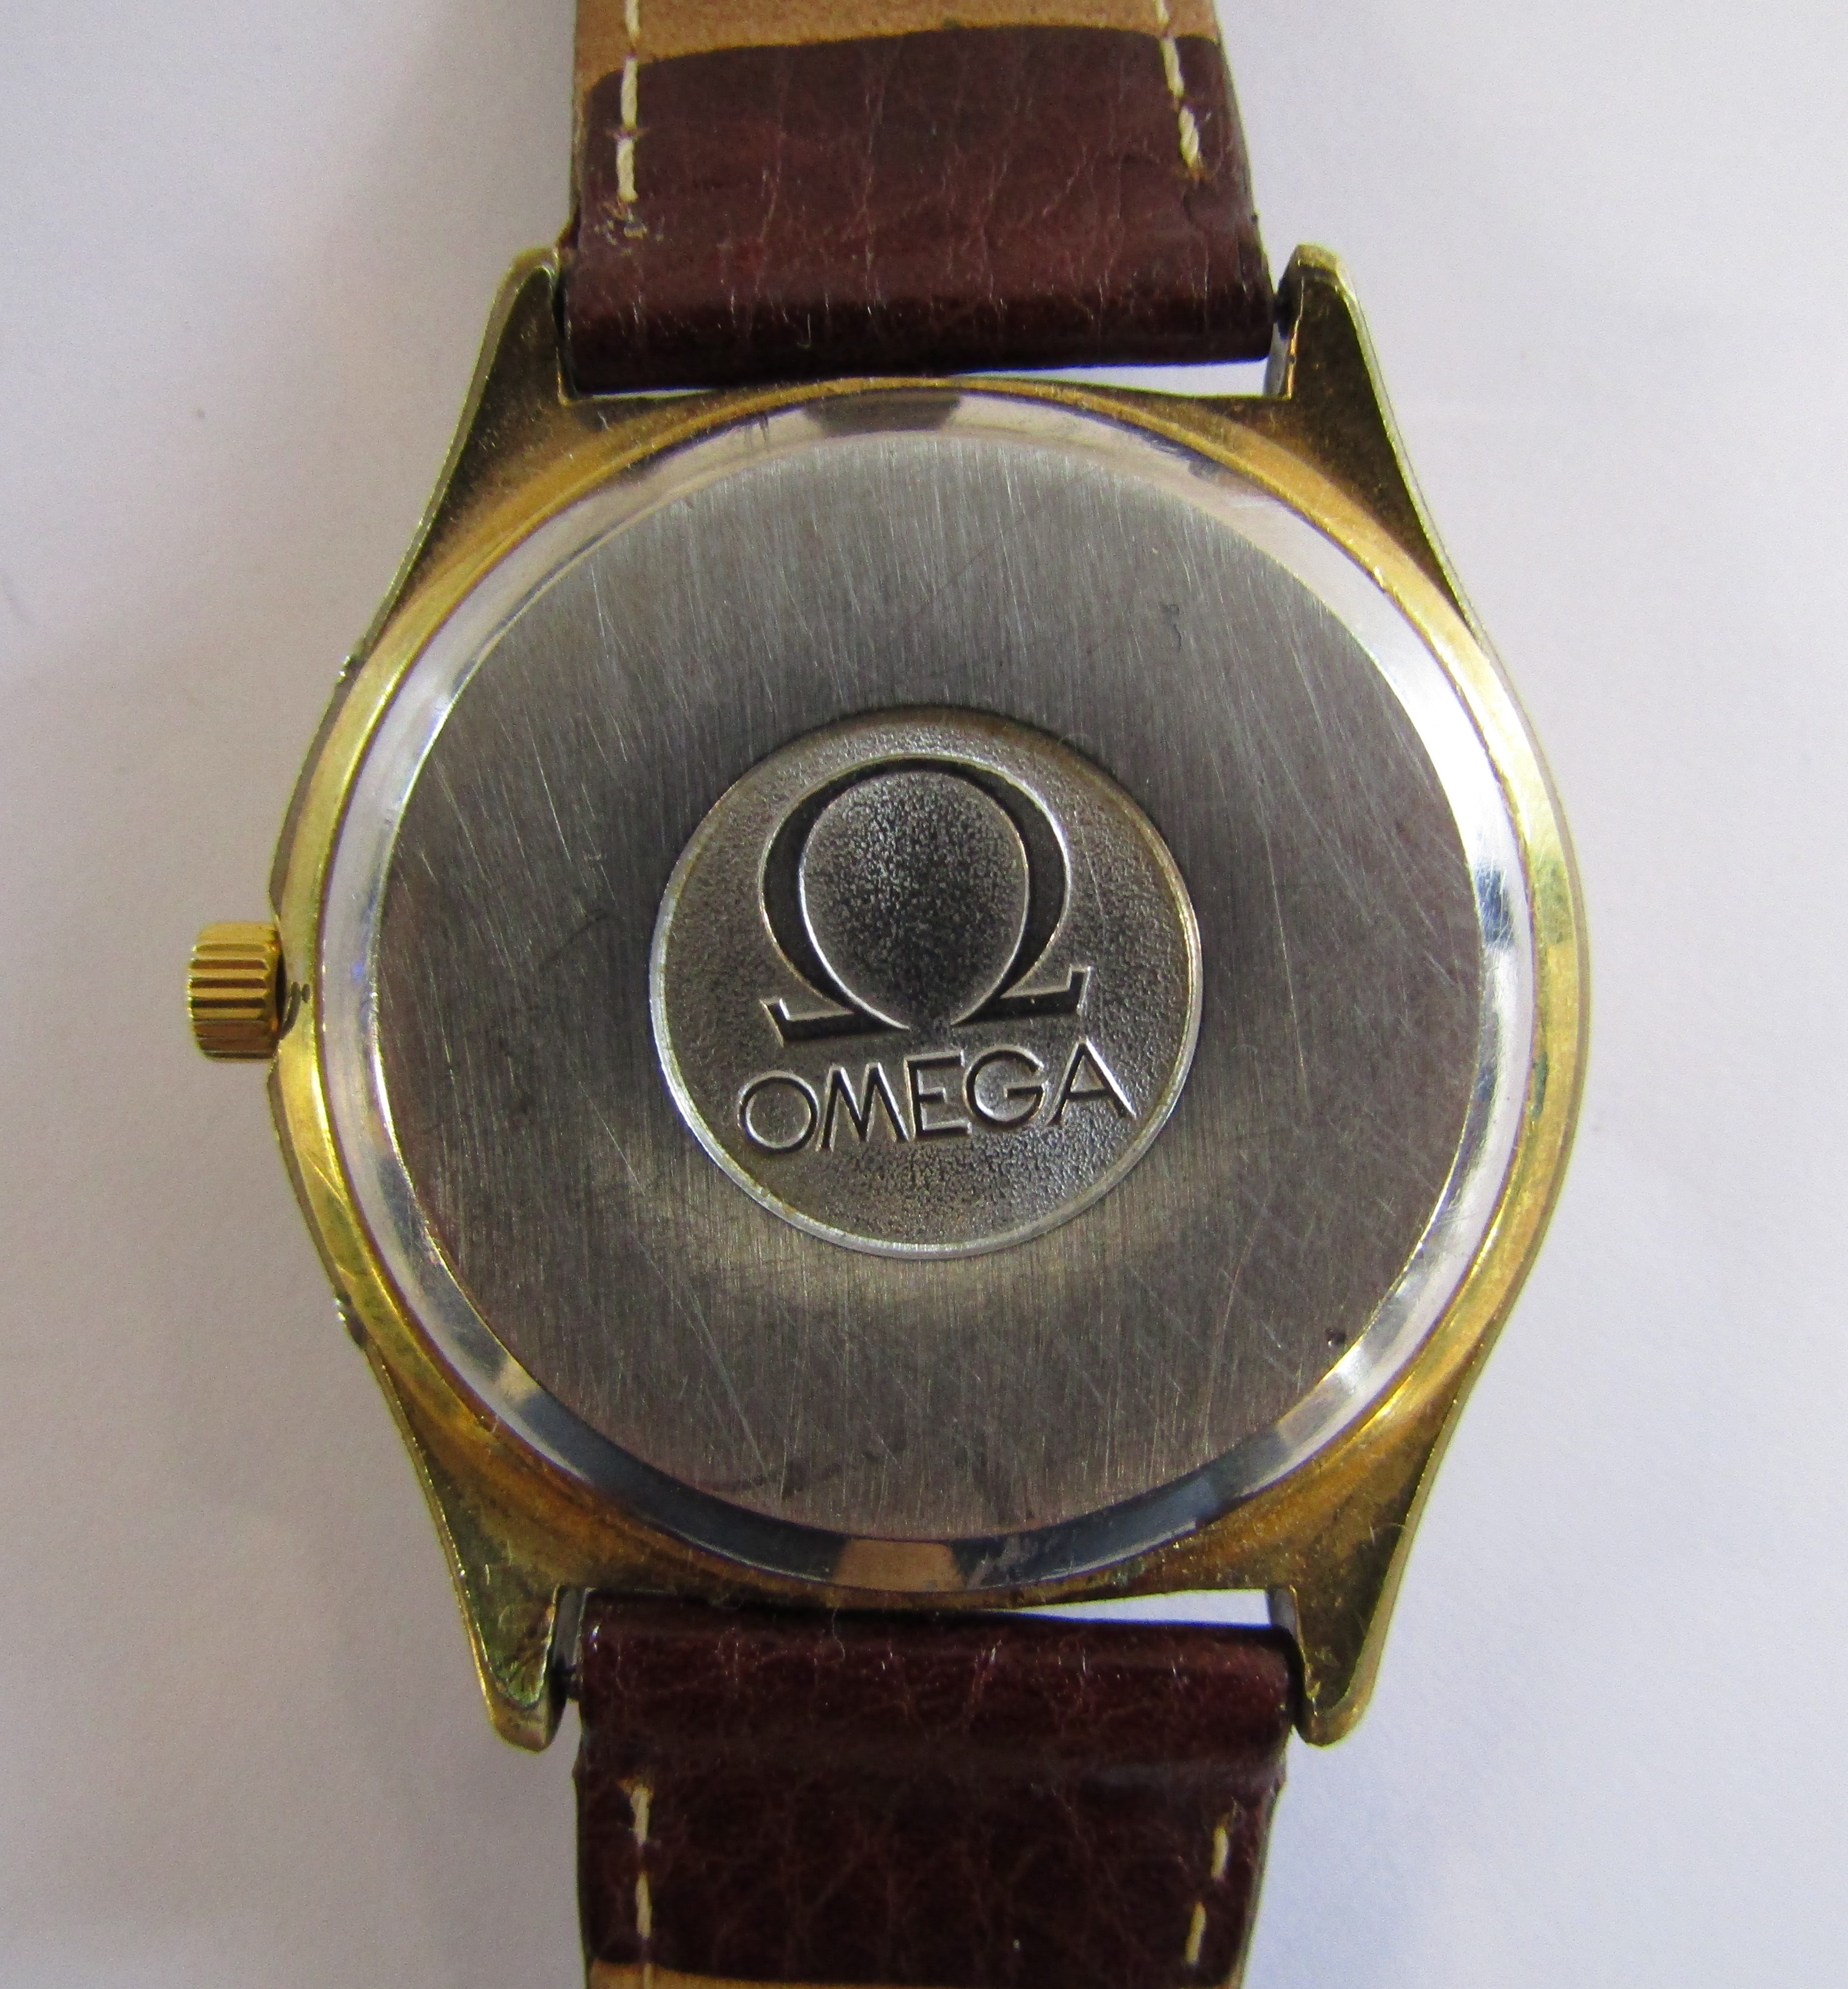 Omega Gold Plated Wristwatch - Image 5 of 5